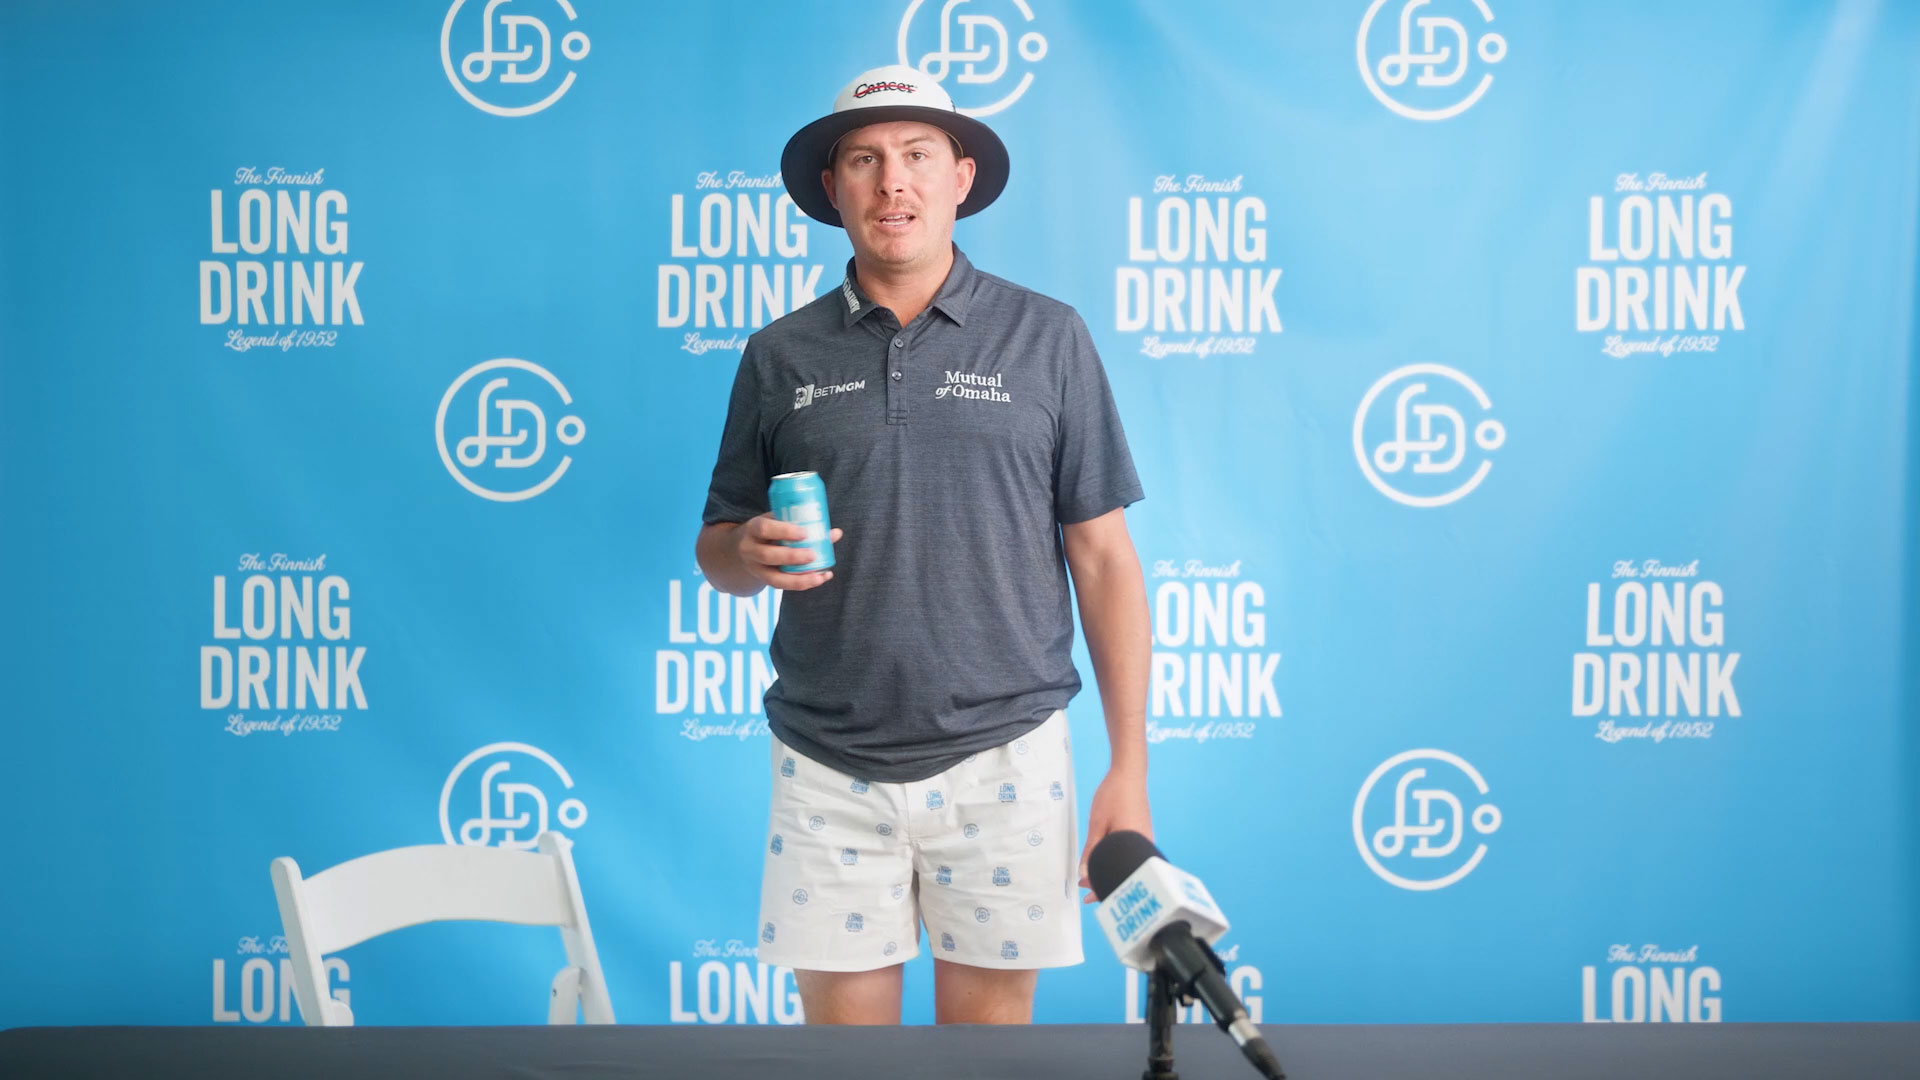 PGA Tour veteran Joel Dahmen—known for his good-natured antics— teams up with The Long for a brazen new campaign aimed at getting people to unzip their pants, all for a good cause.